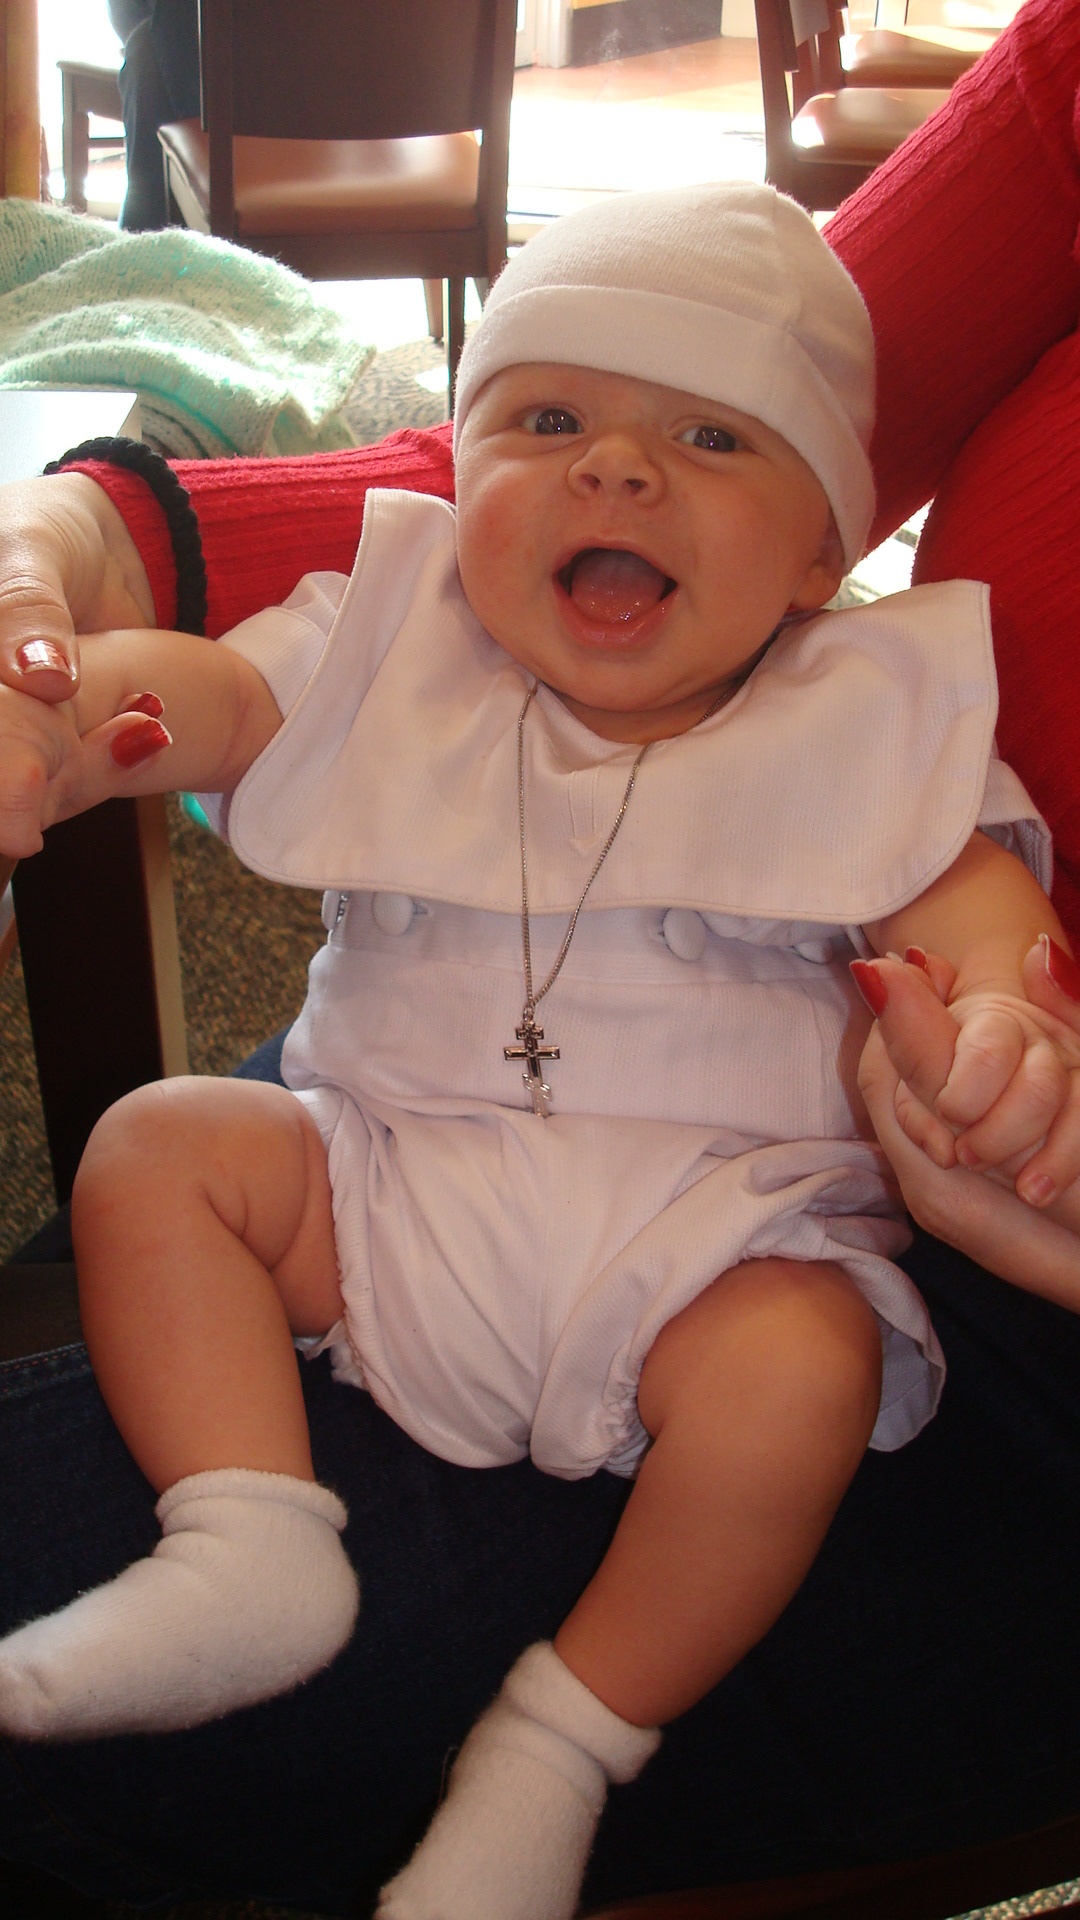 A good Christian picture, featuring his new cross and his baptism clothes